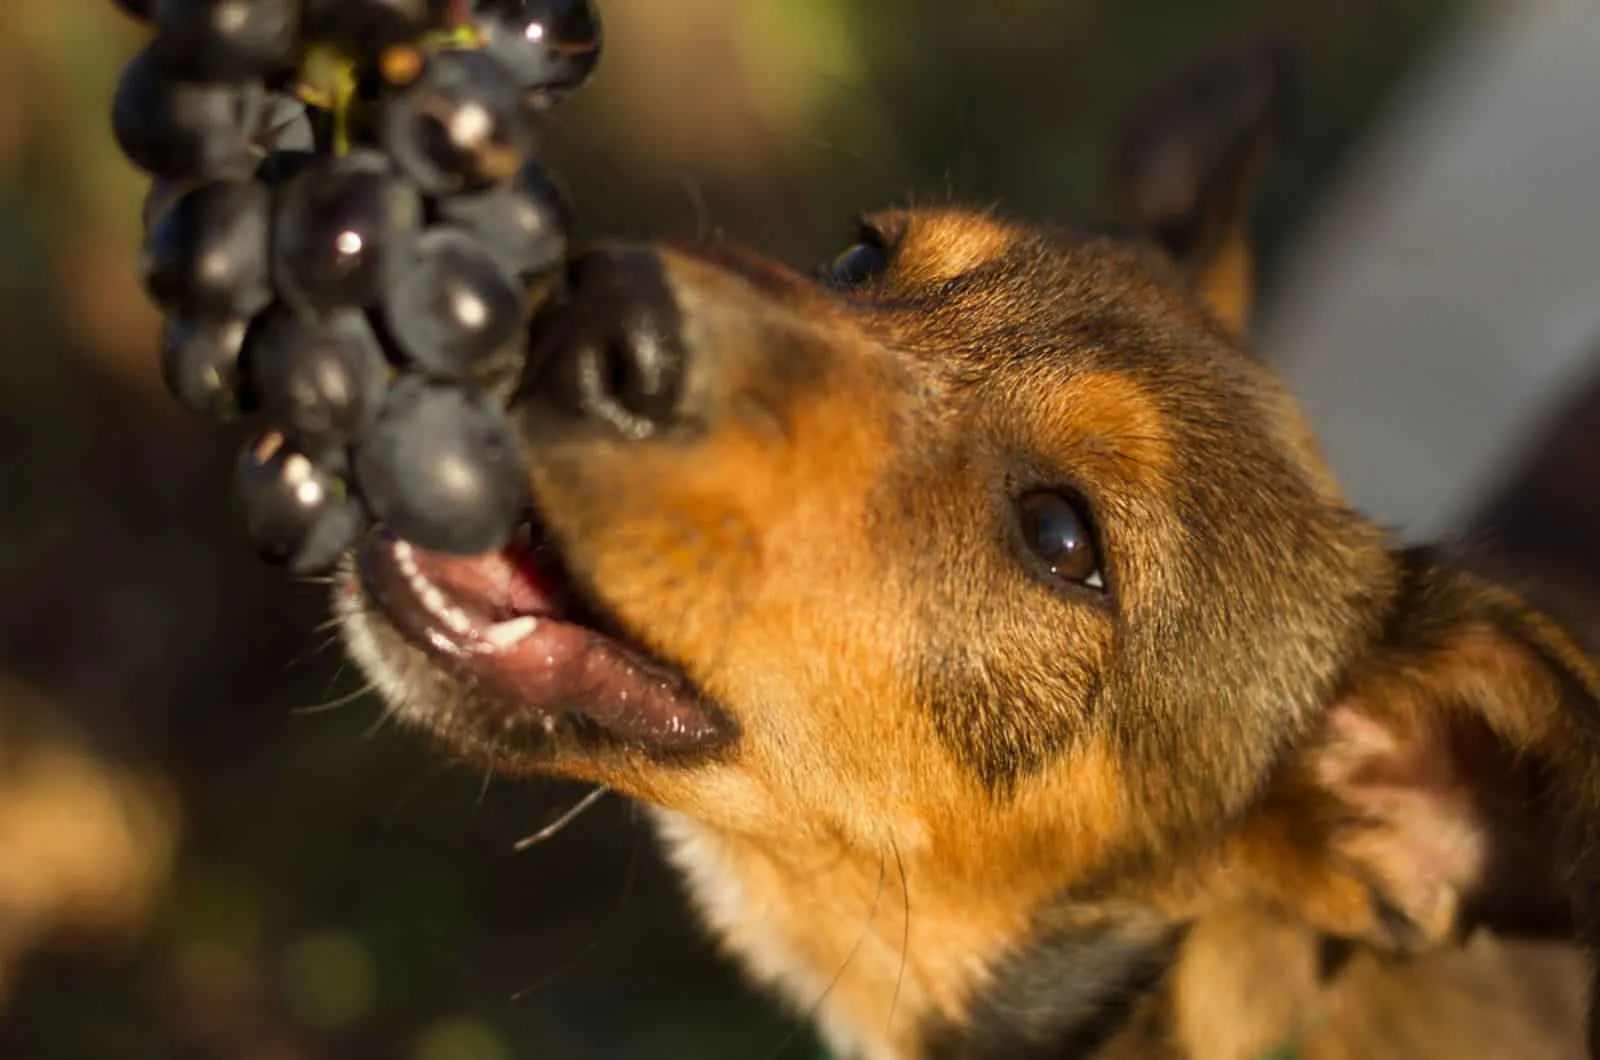 dog eating grapes from a branch in the garden